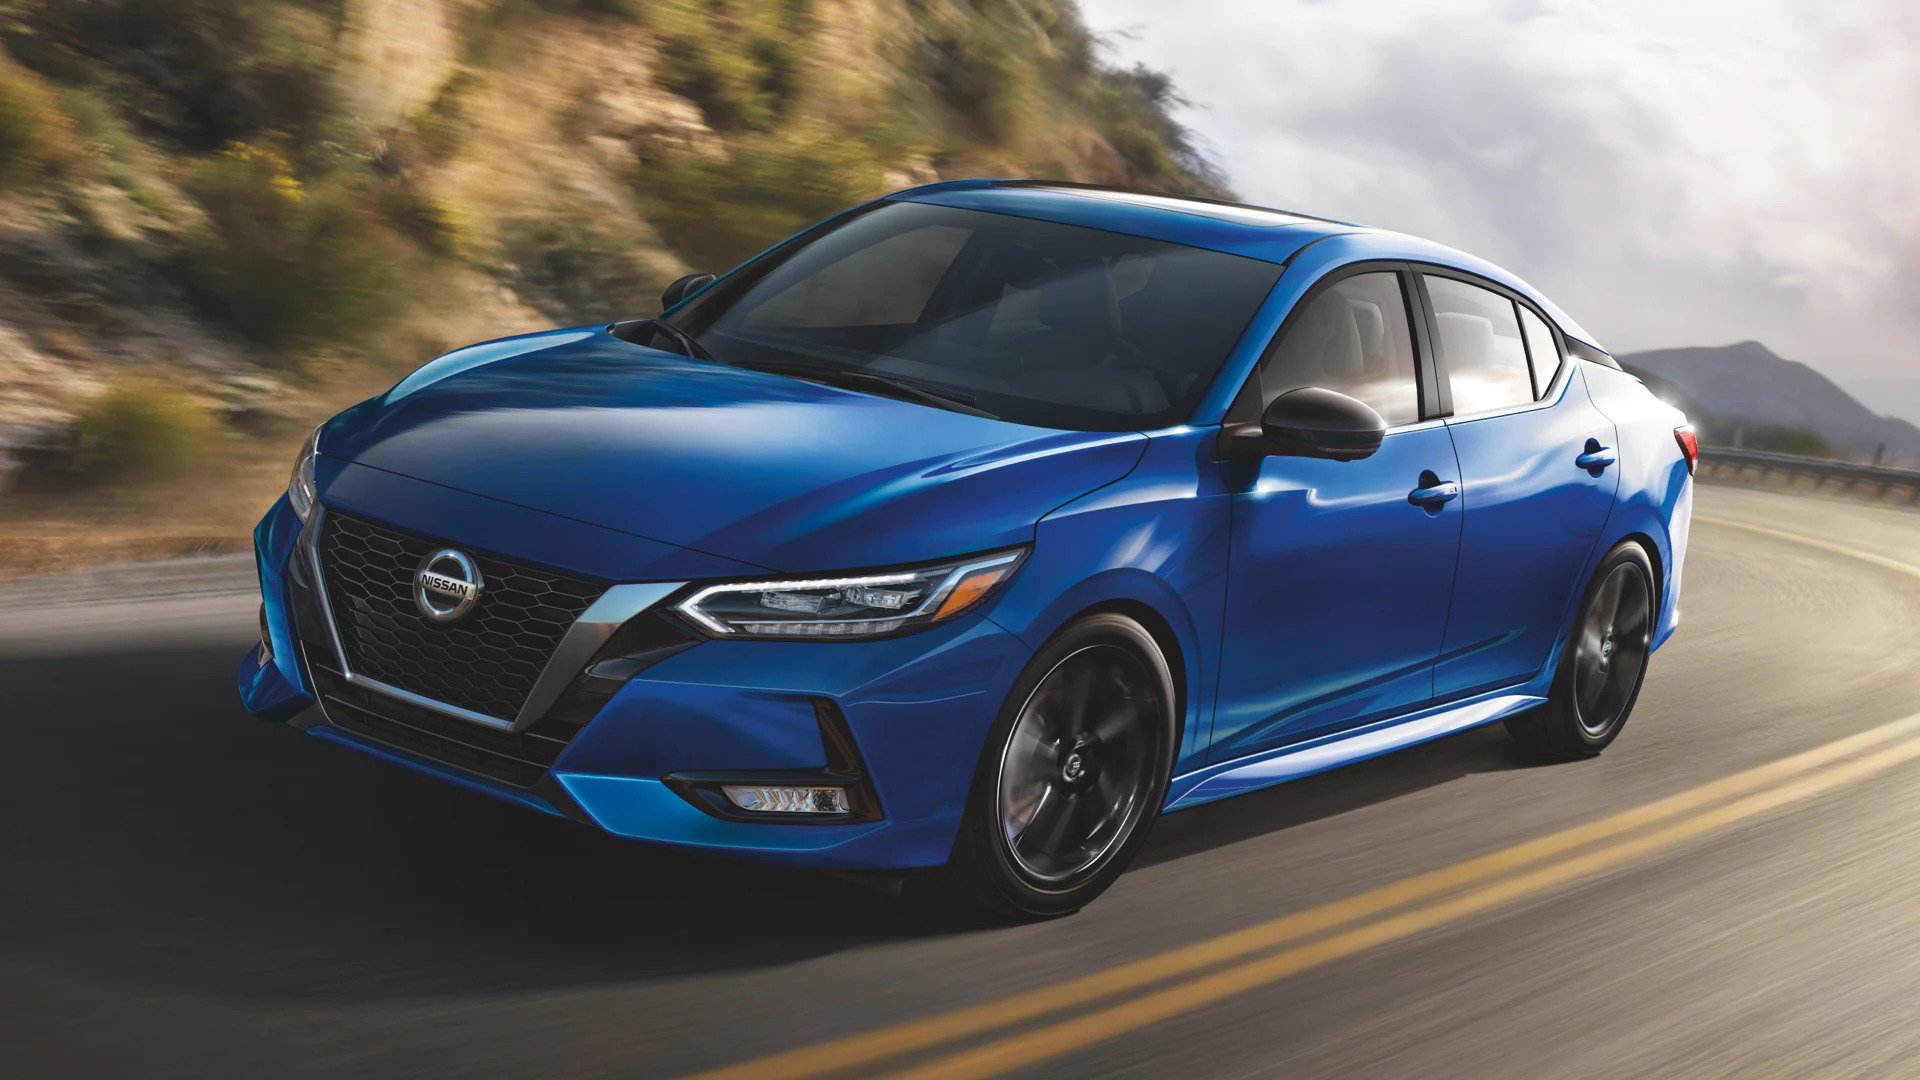 Conyers Nissan is a Nissan dealership in Conyers, GA, where you can find the 2020 Nissan Sentra, 2019 Nissan Sentra, or the latest Nissan Sentra.